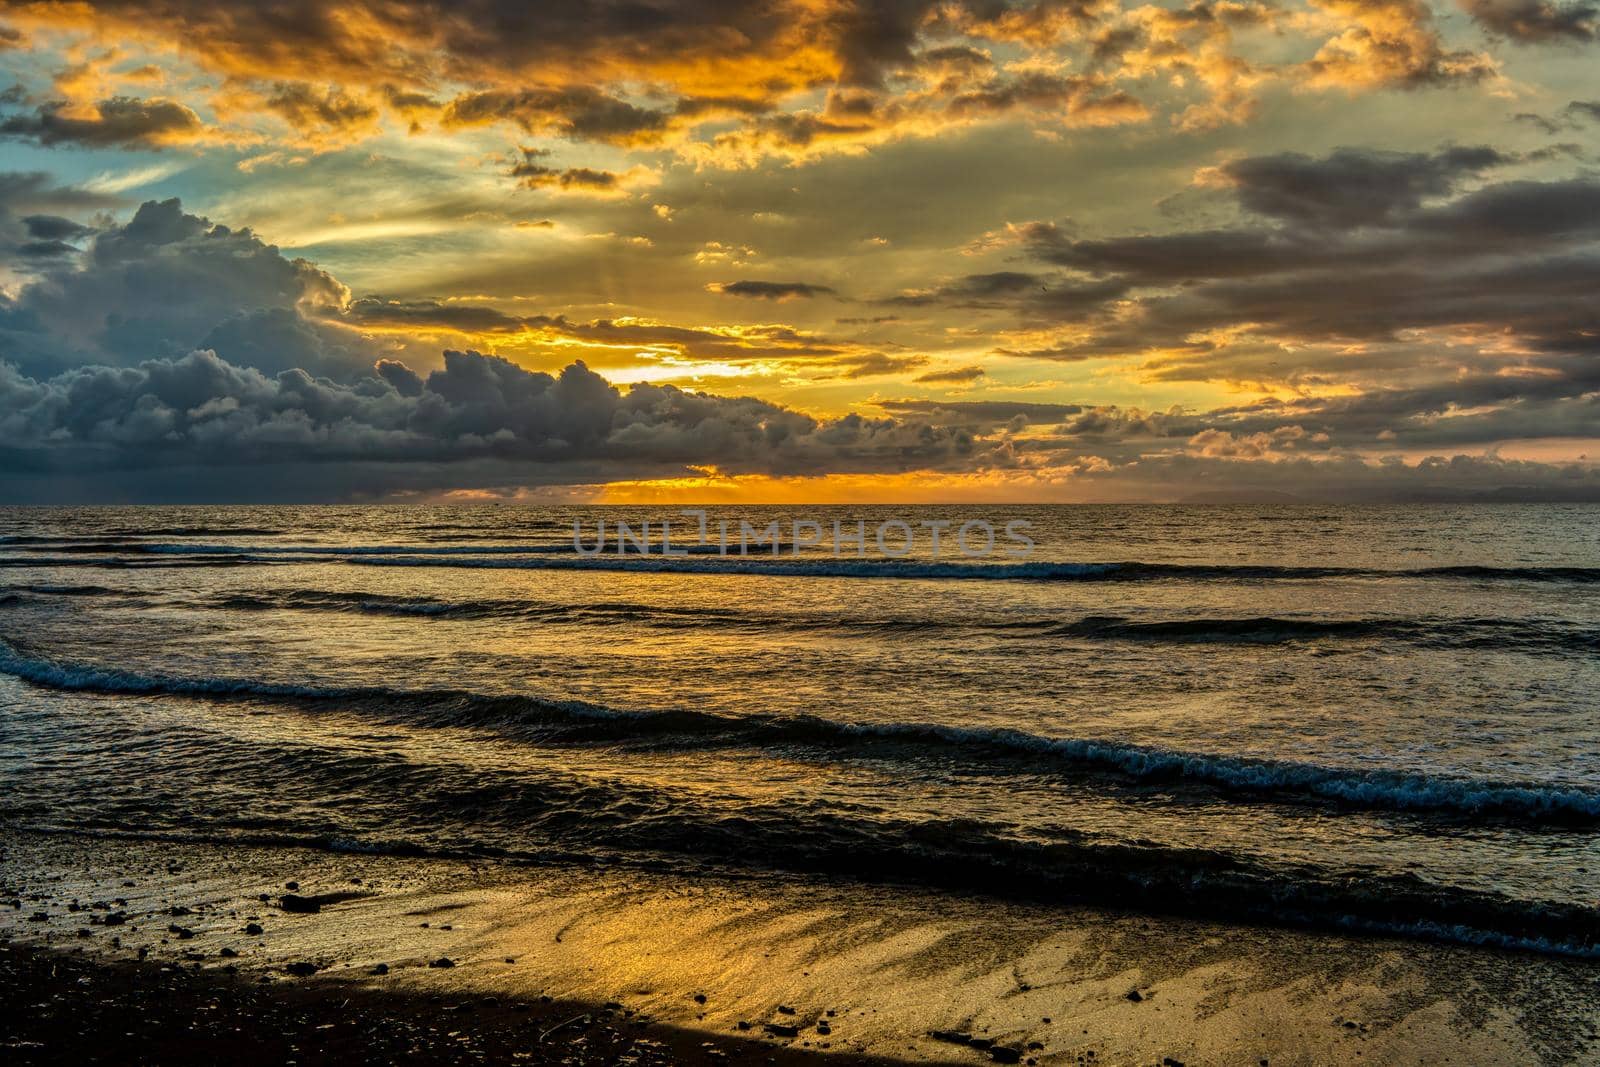 Evening view of the Pacific Coast of Tarcoles in Carara lit by the setting sun and glittering waves . Idyllic sunset landscape. Tarcoles, Costa Rica. Pura Vida concept, travel to exotic tropical country.